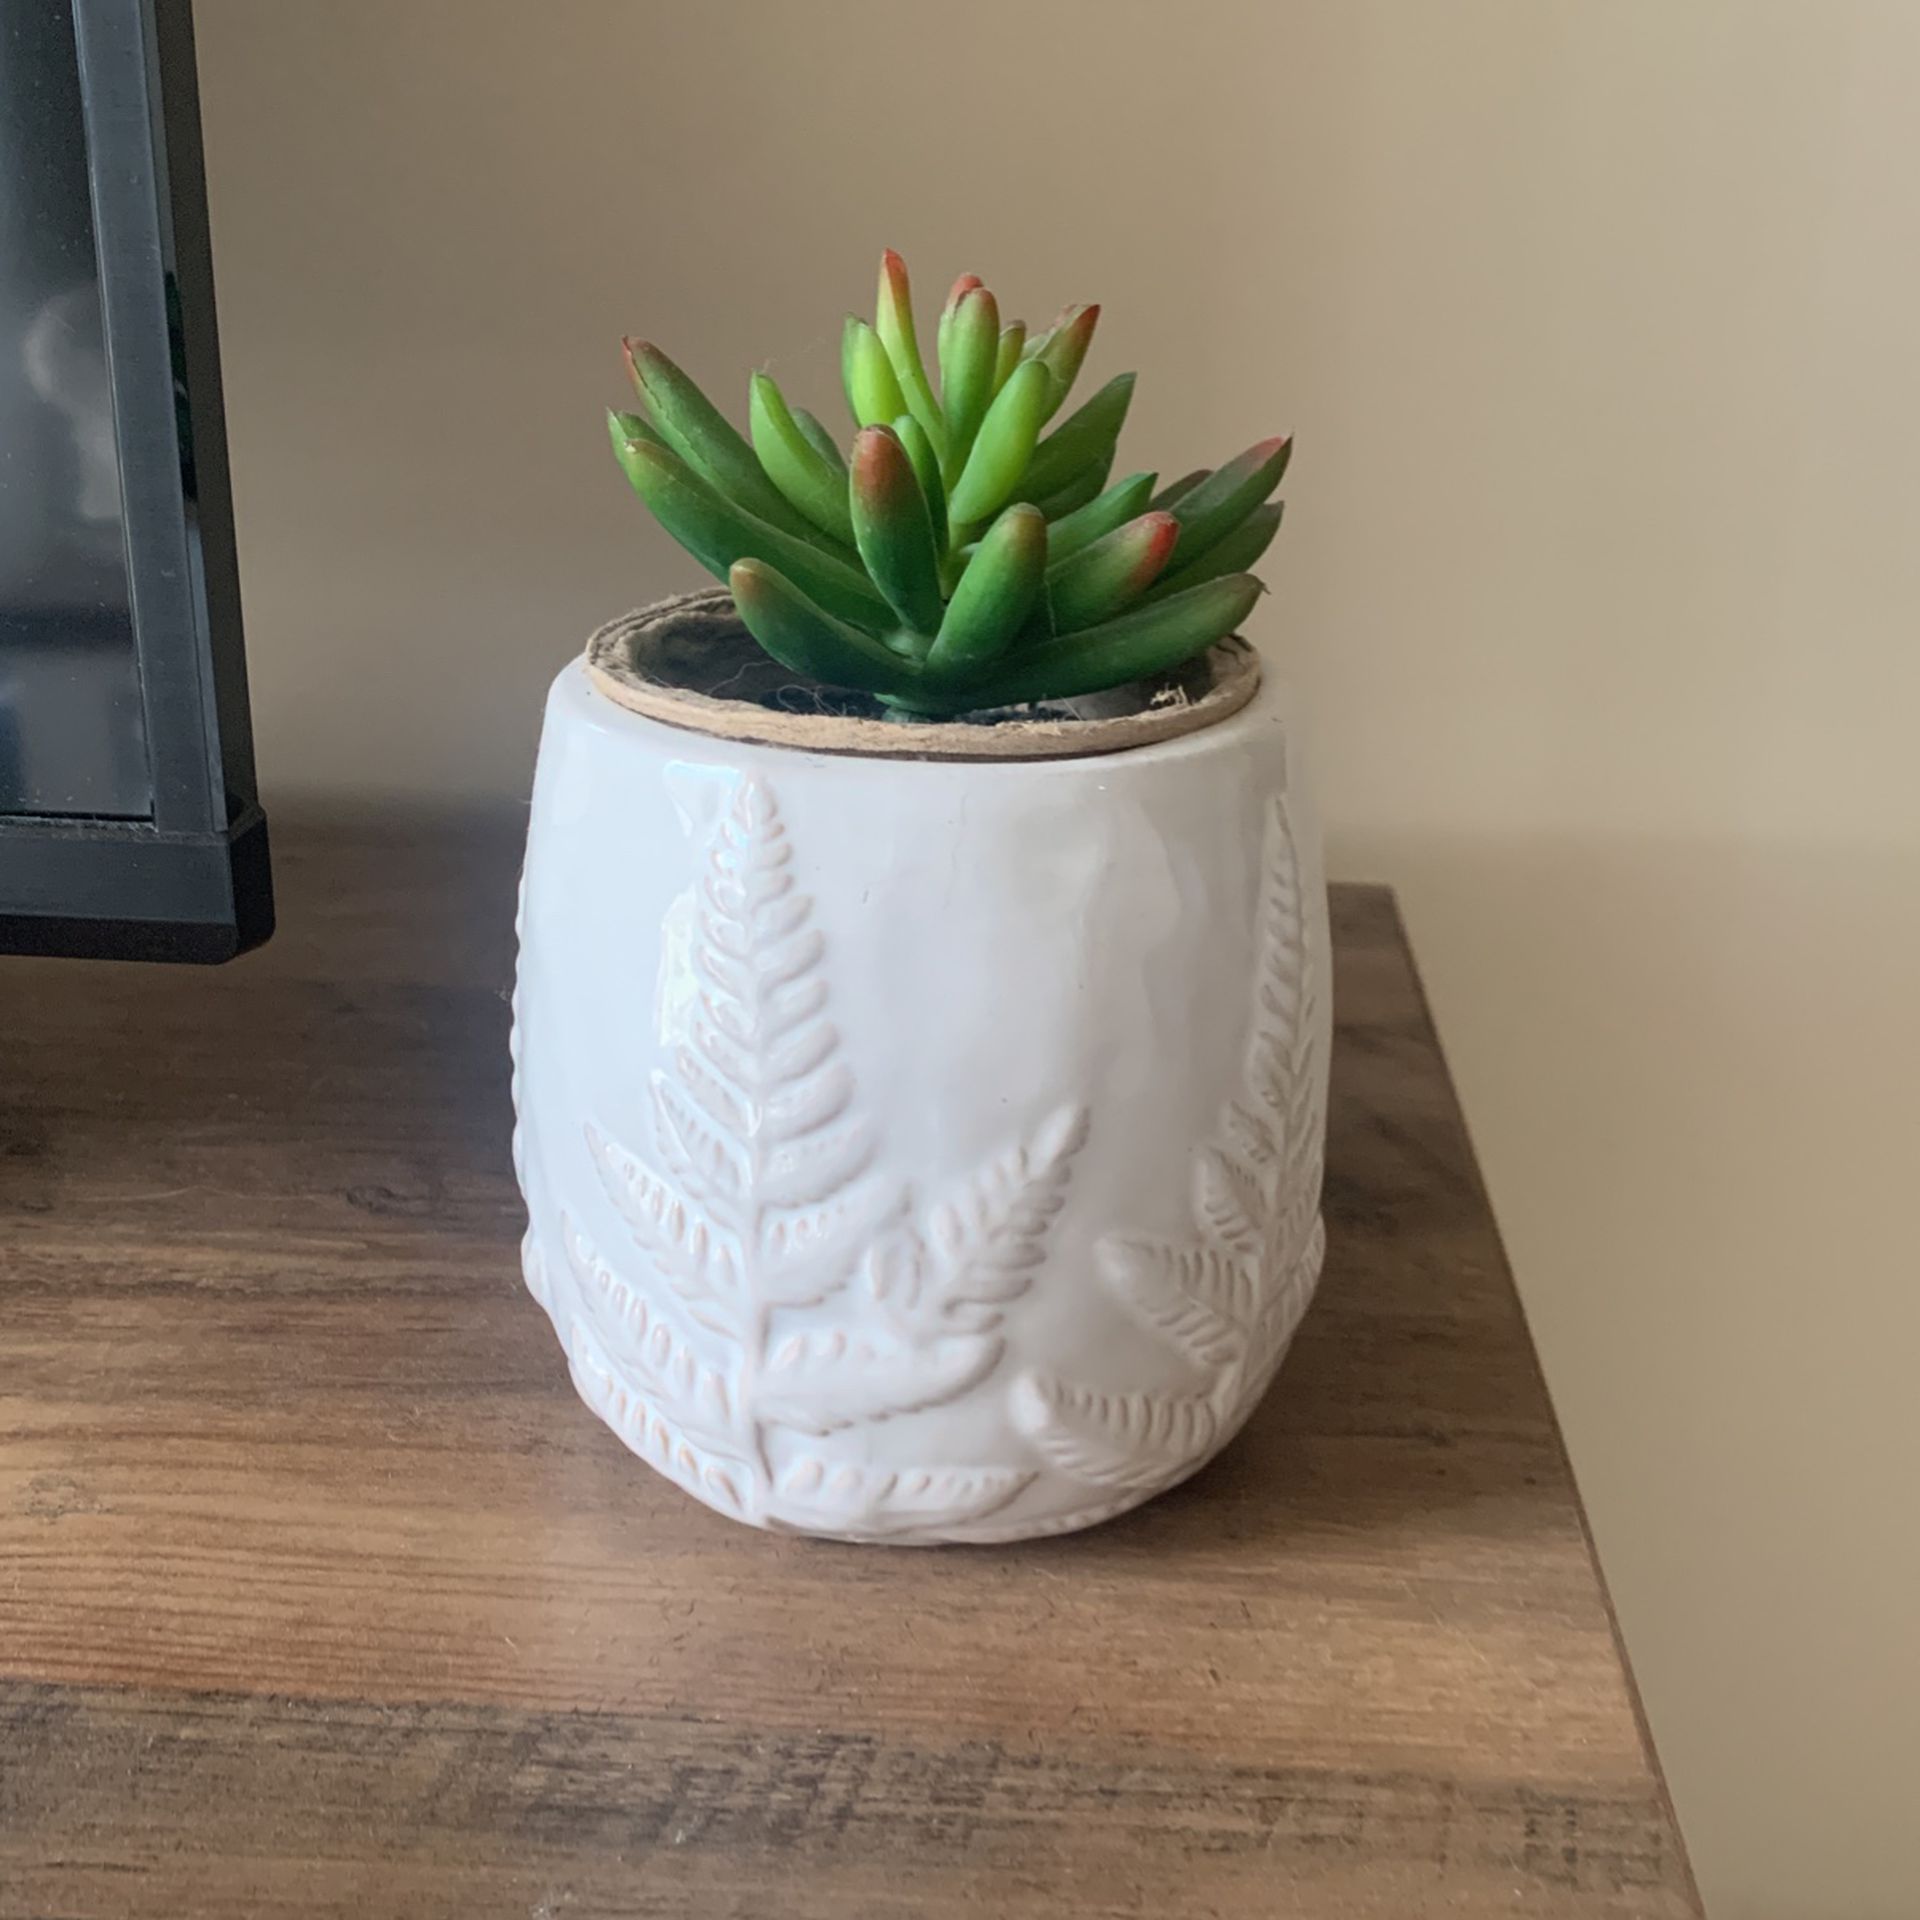 Fake Plant and holder